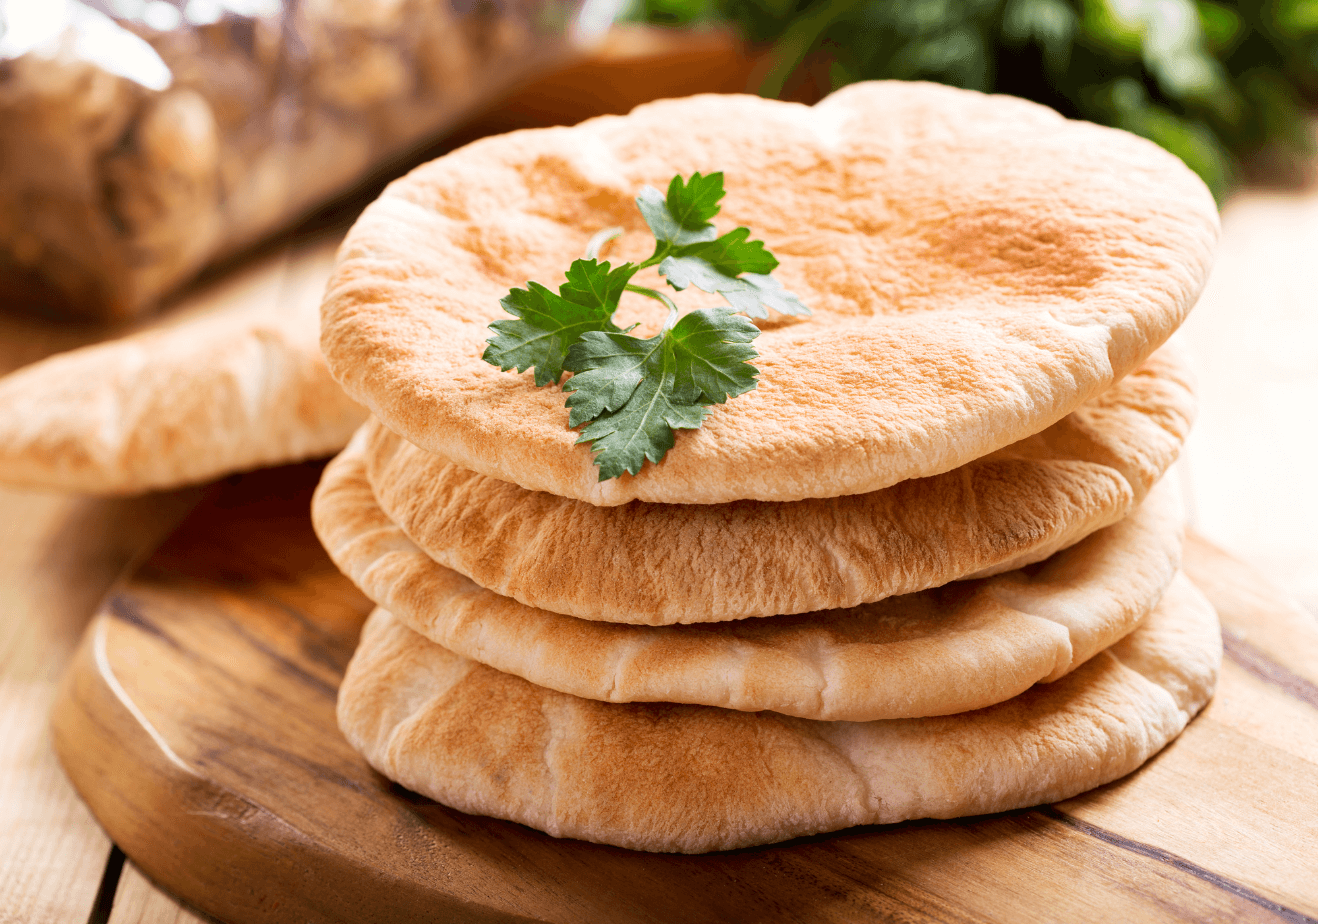 Pita Bread from the Middle East